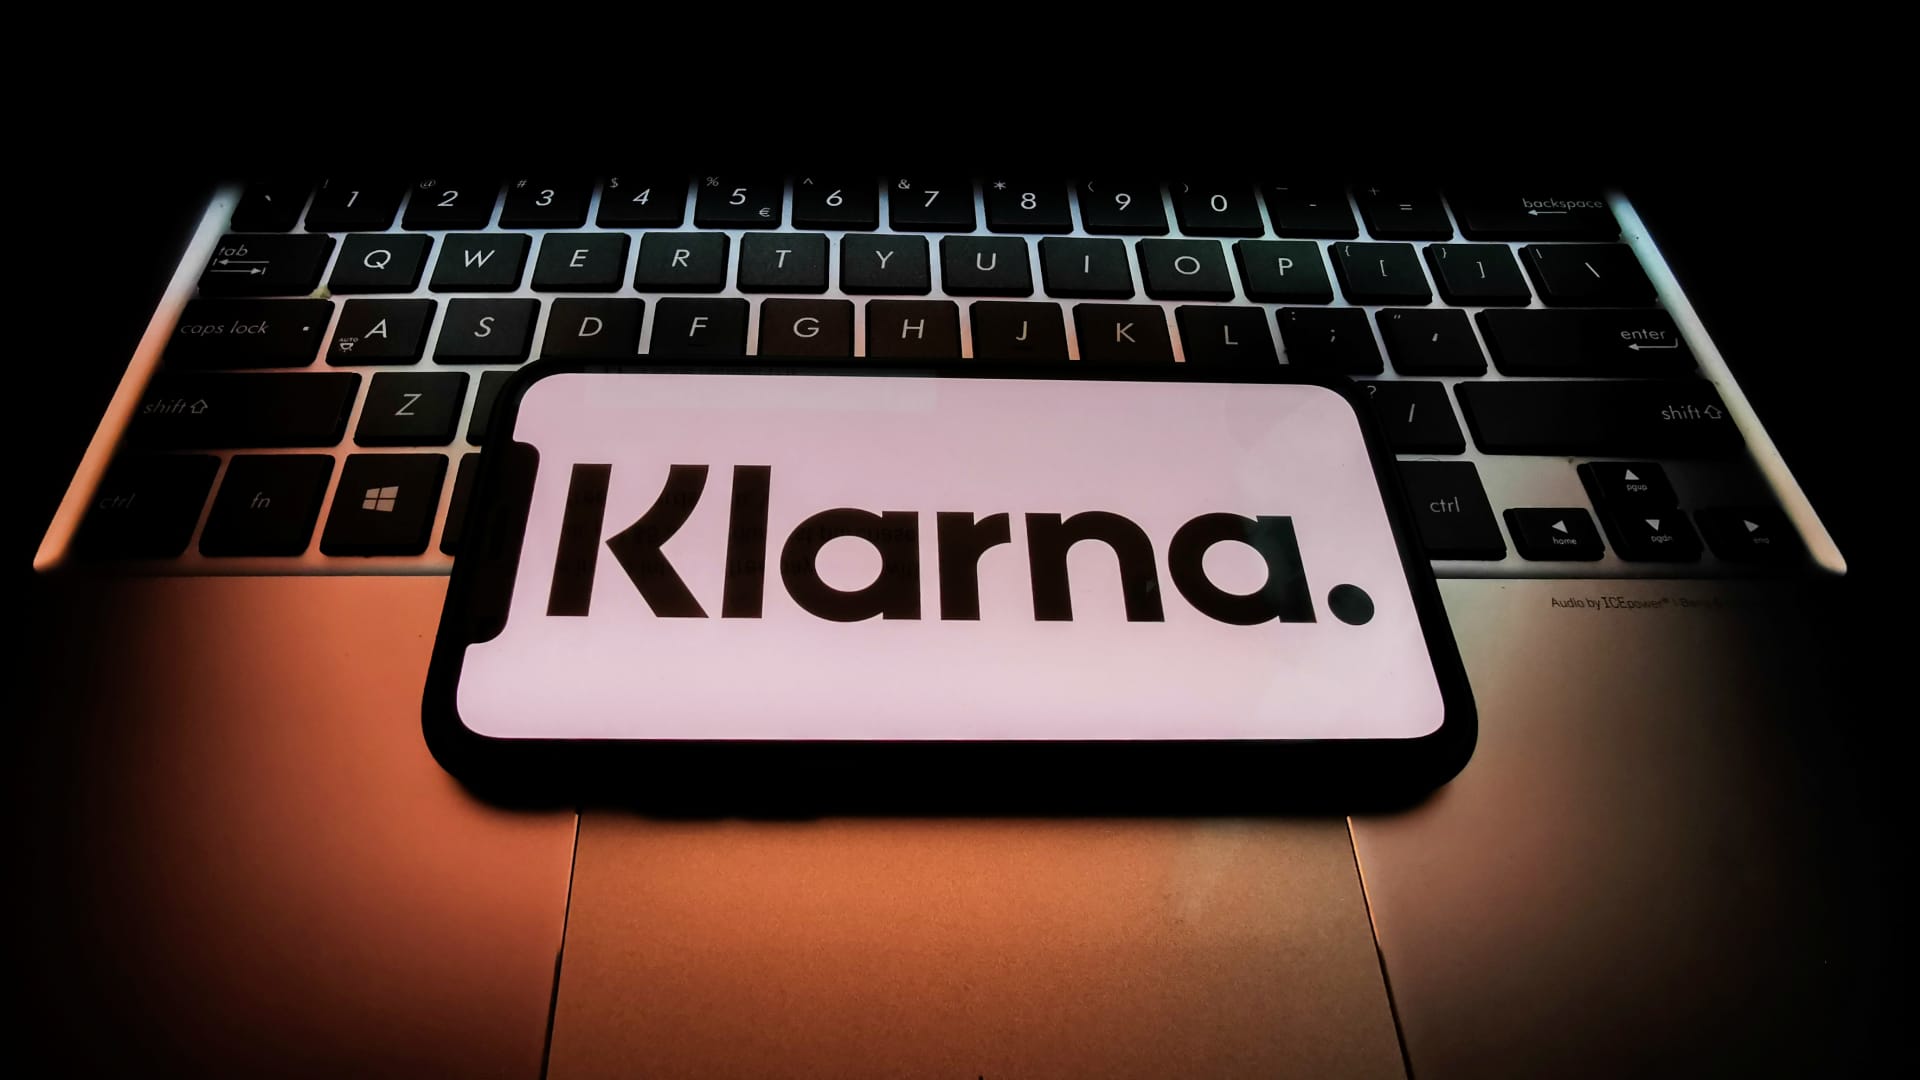 Buy now, pay later firm Klarna cuts losses in first half but fails to post profit